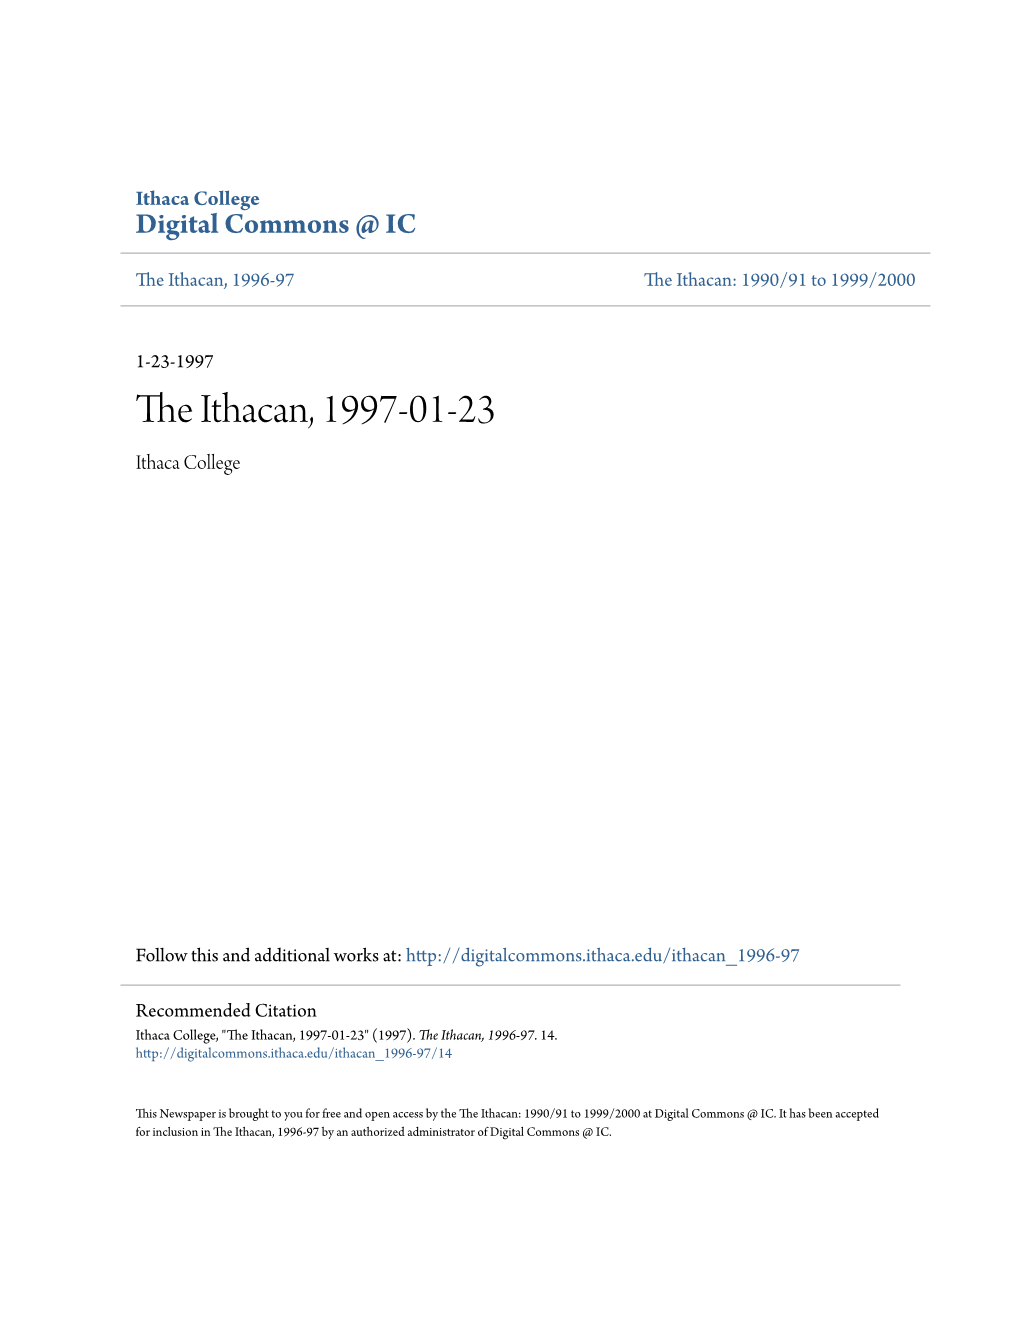 The Ithacan, 1997-01-23